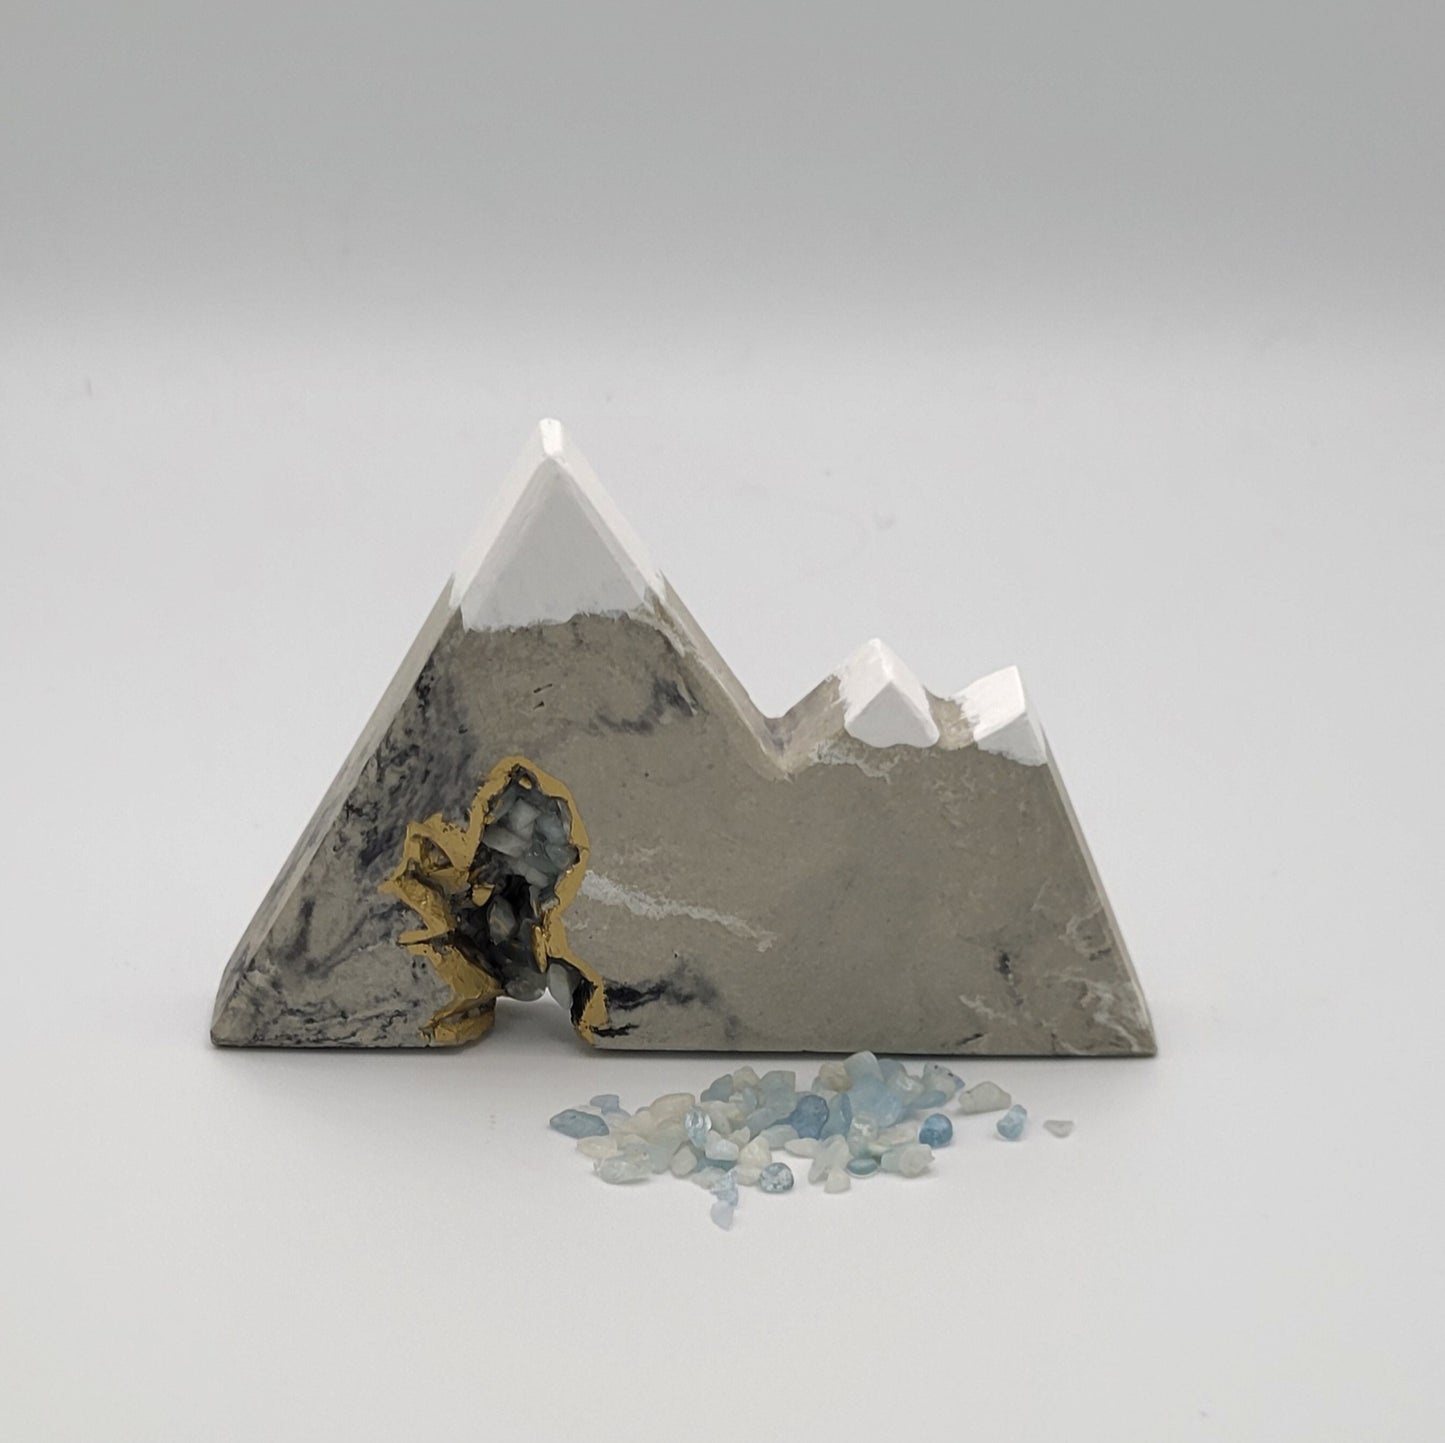 Small Geode Mountain with Gemstones